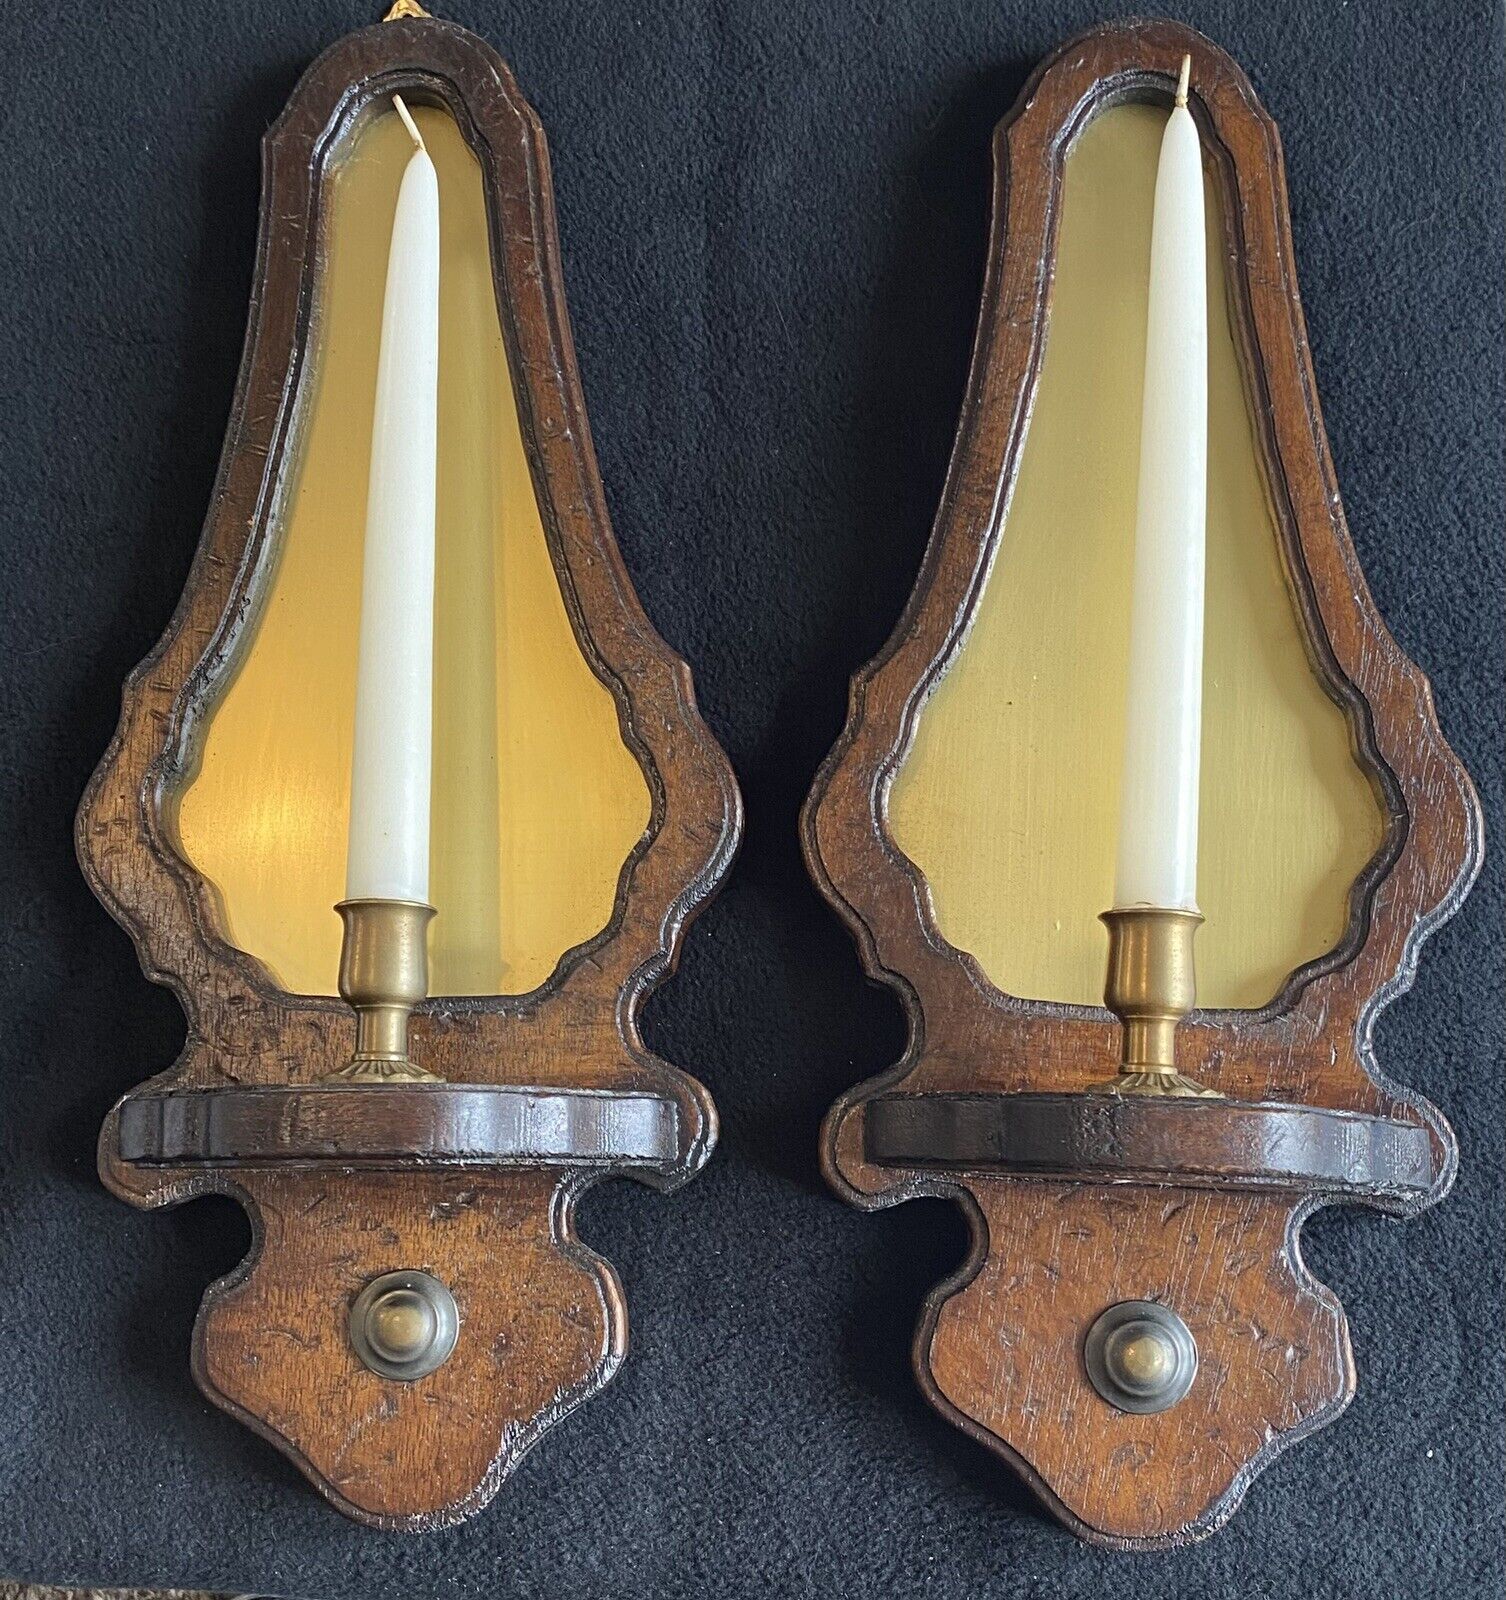 Vintage Rustic Wood & Brass Candlestick Sconces Made In Italy 17” Tall Beautiful